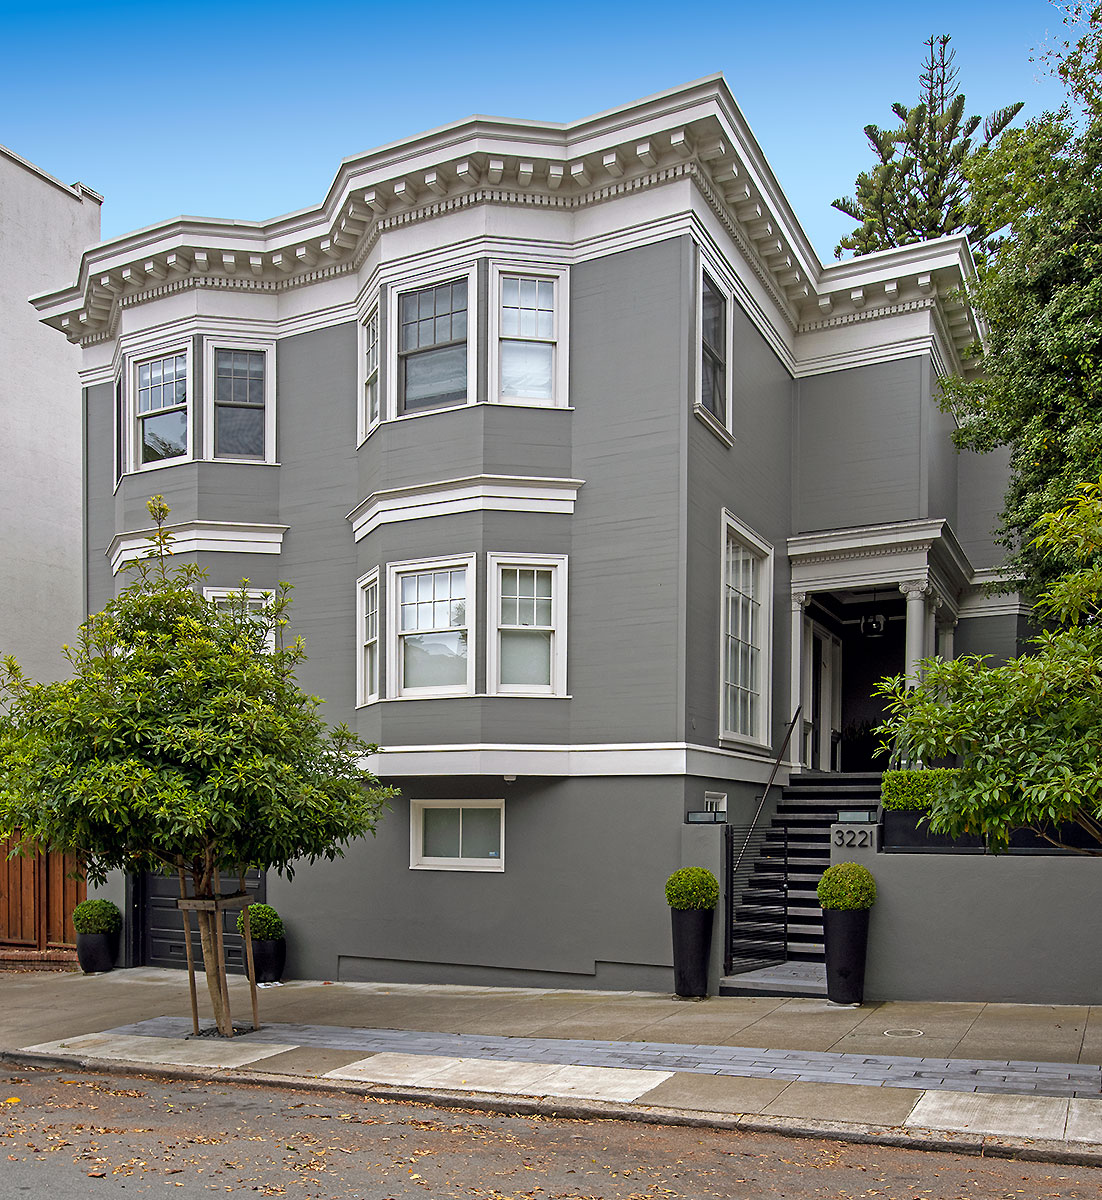 3221 Washington Street in Pacific Heights, designed by Edward E. Young, built 1926